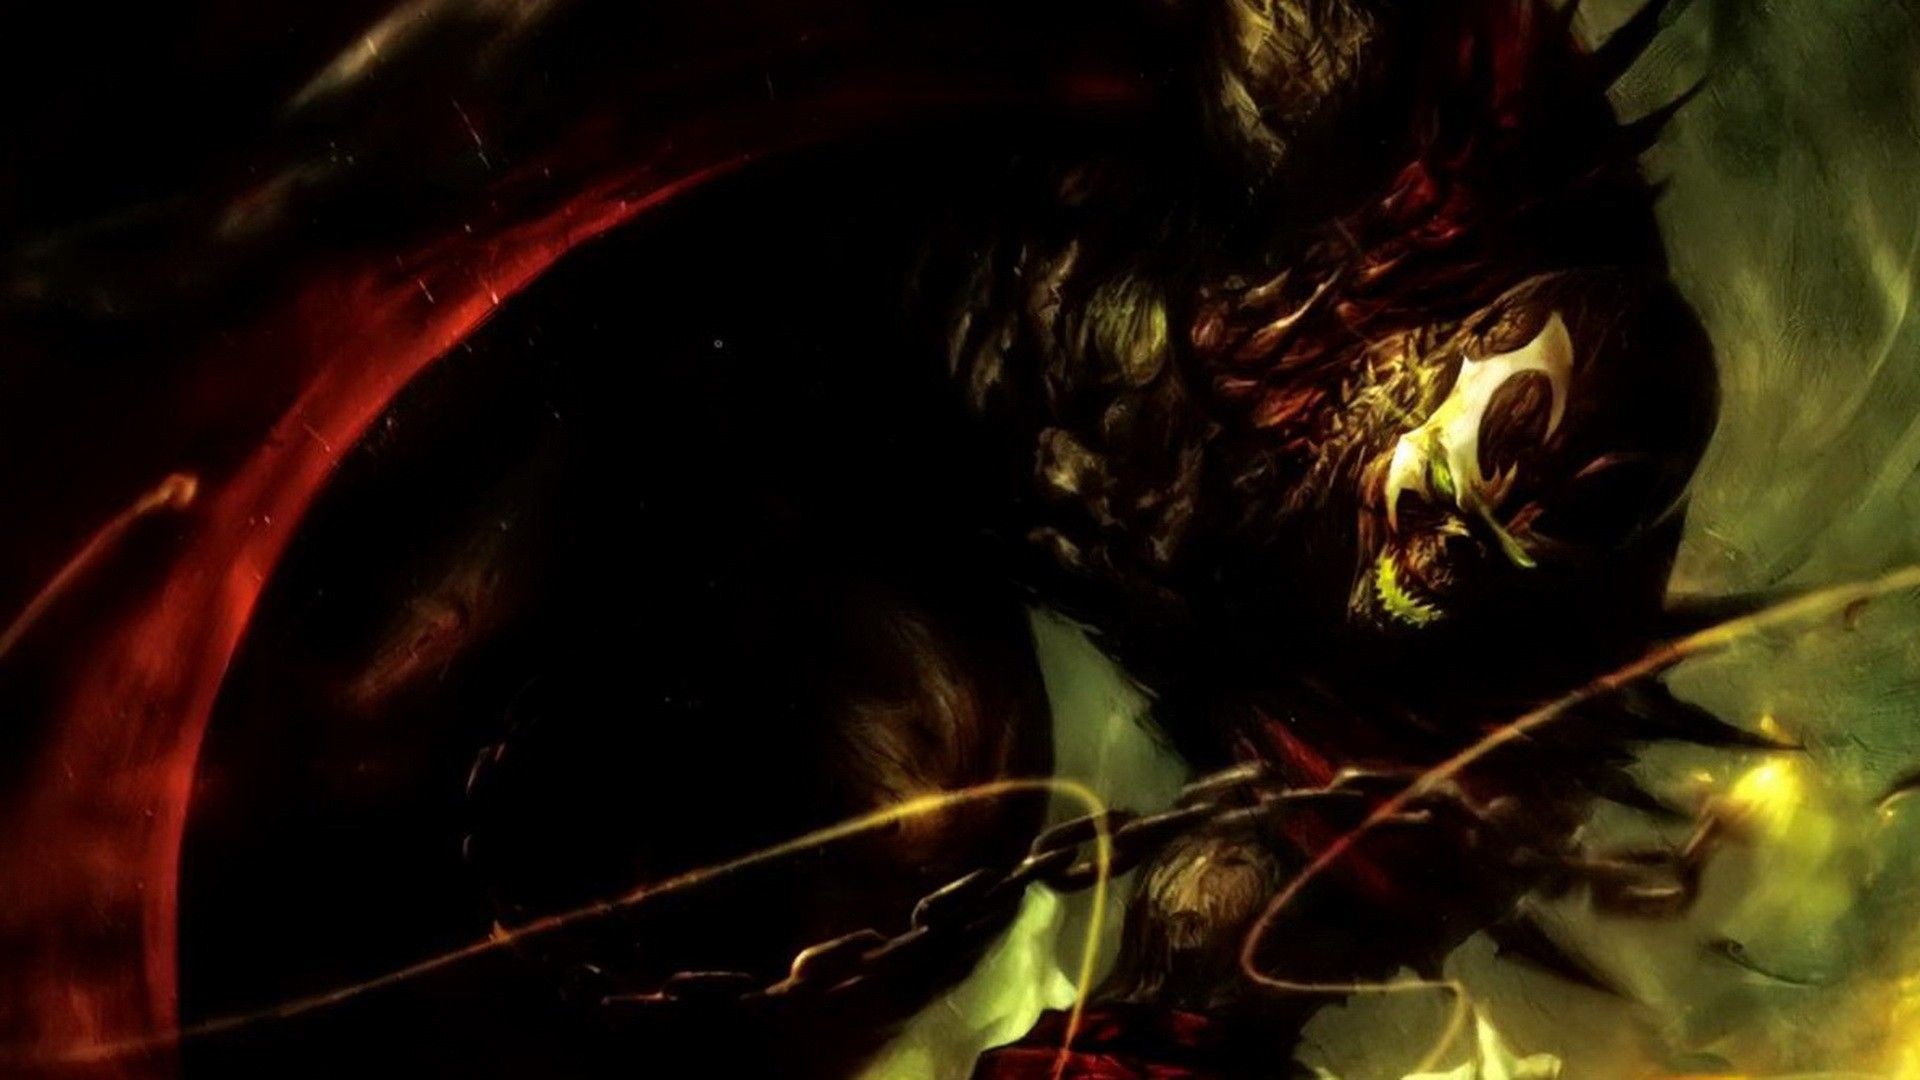 1920x1080 Spawn Wallpaper Free | Amazing Wallpapers | Pinterest | Spawn and Wallpaper